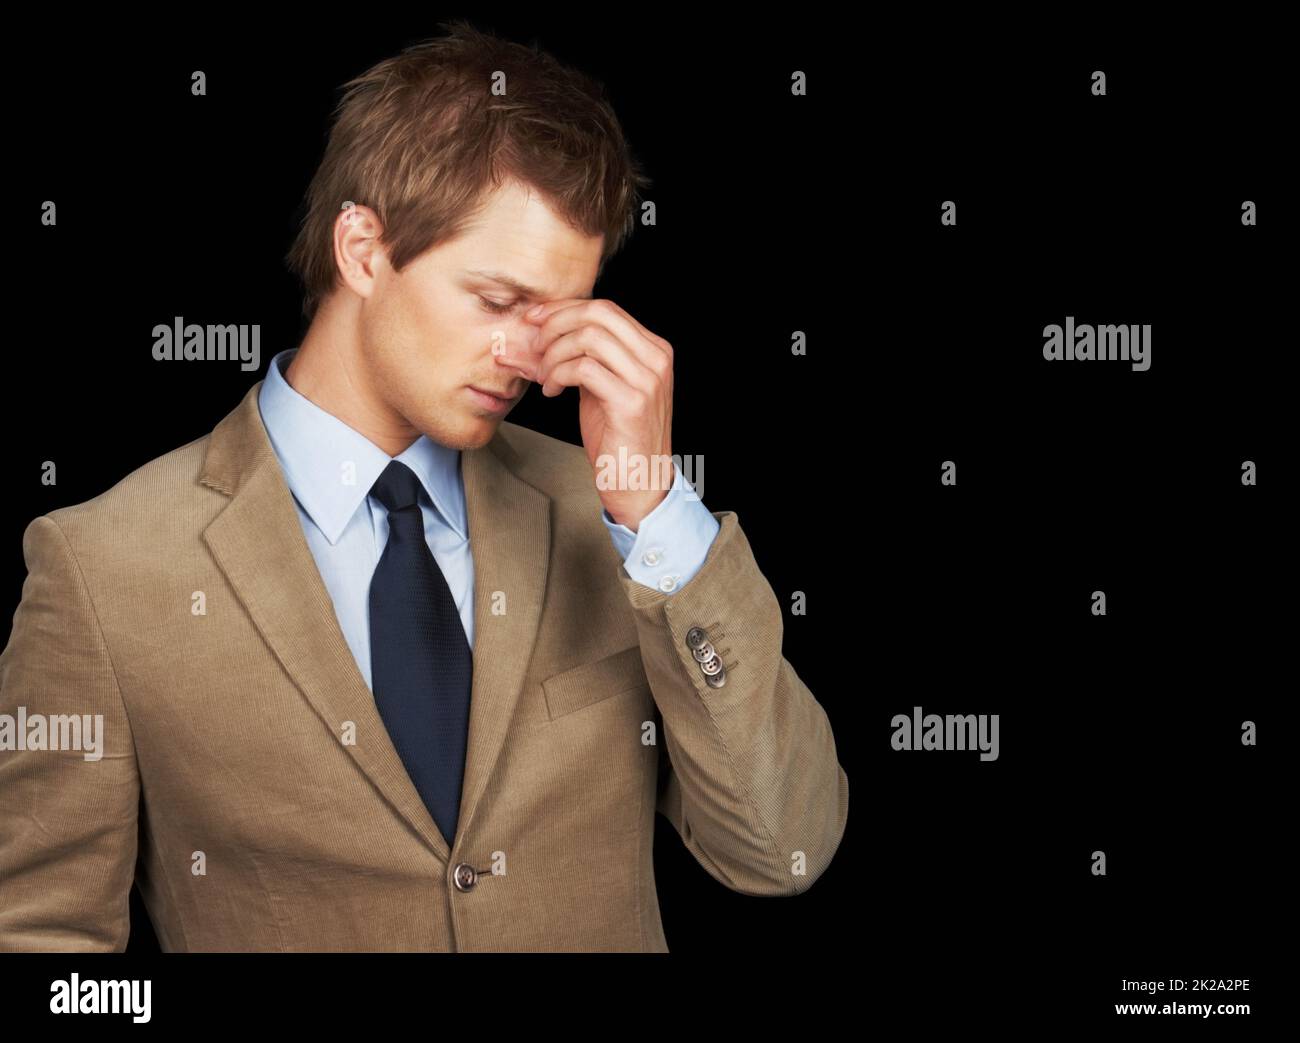 Stressed out business man over black background. Stressed out young business man over black background. Stock Photo